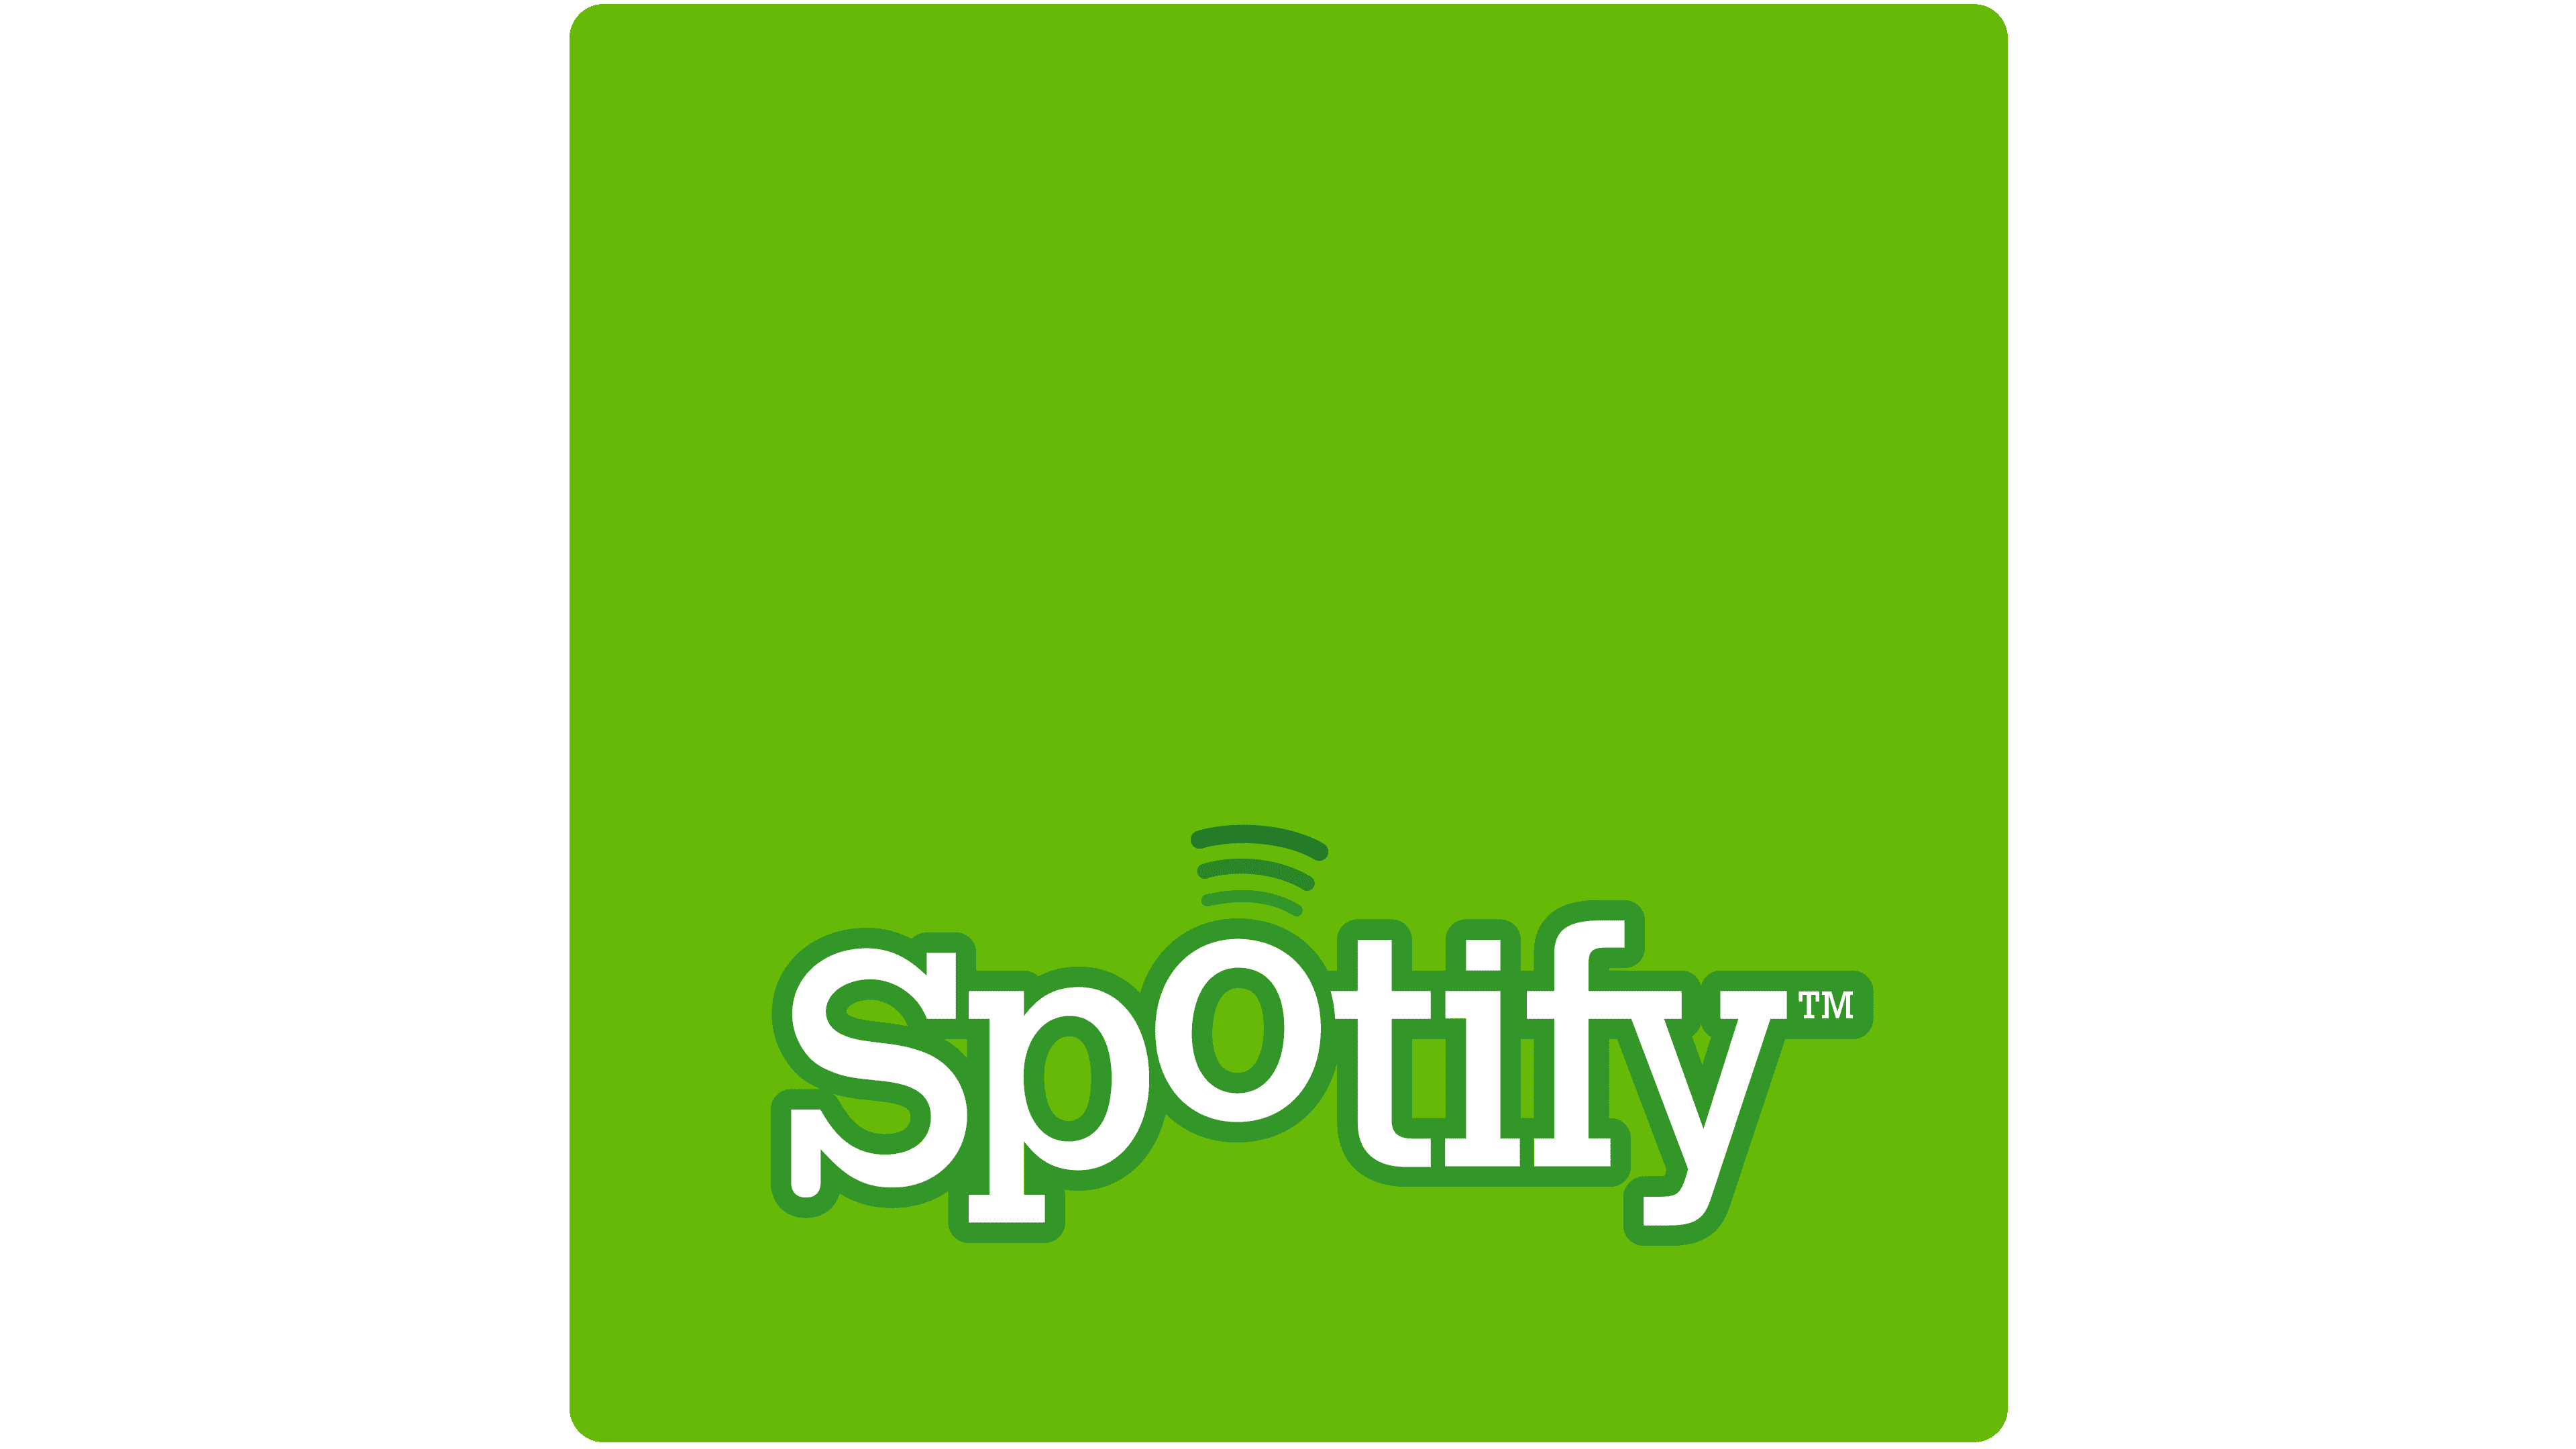 spotify color palette meaning